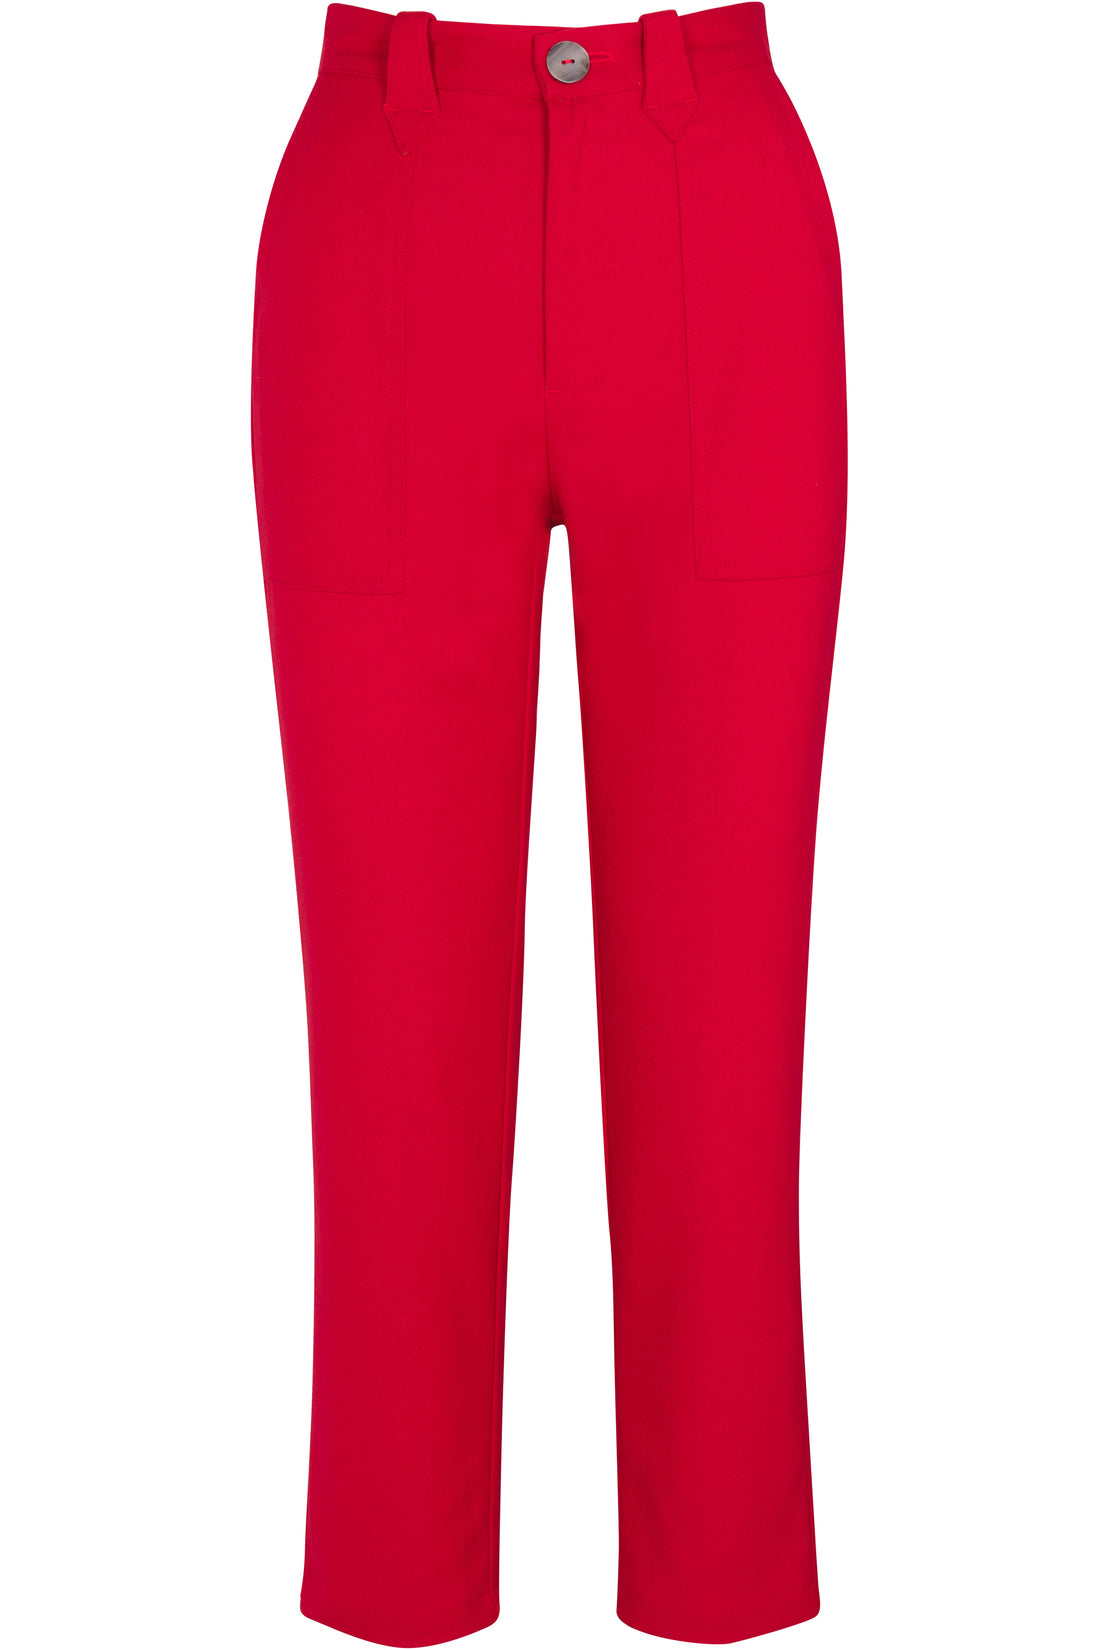 Face cut out Red Trousers